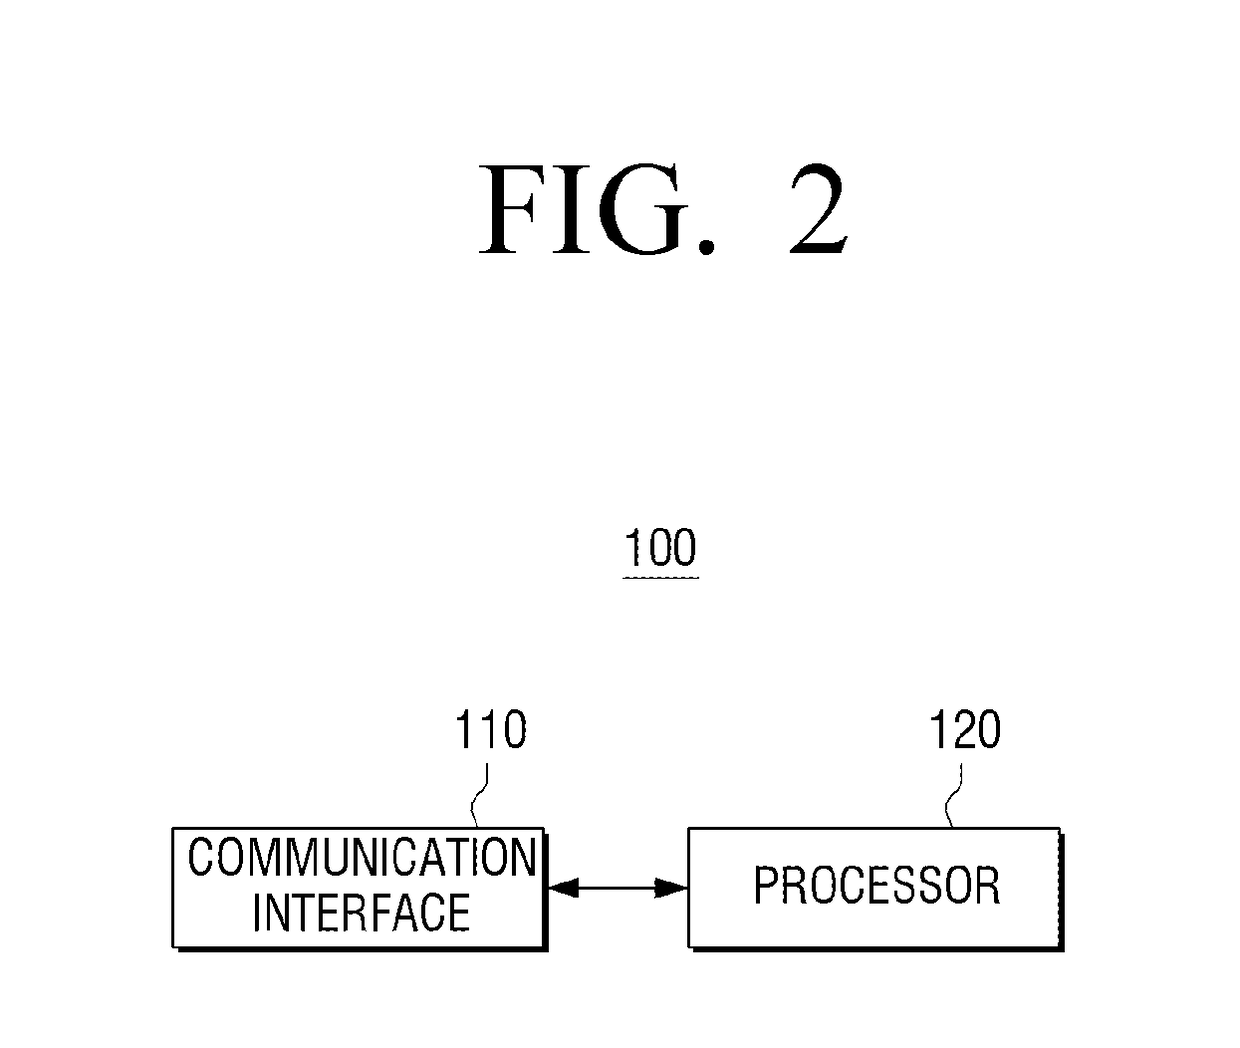 Ecu identifying apparatus and controlling method thereof